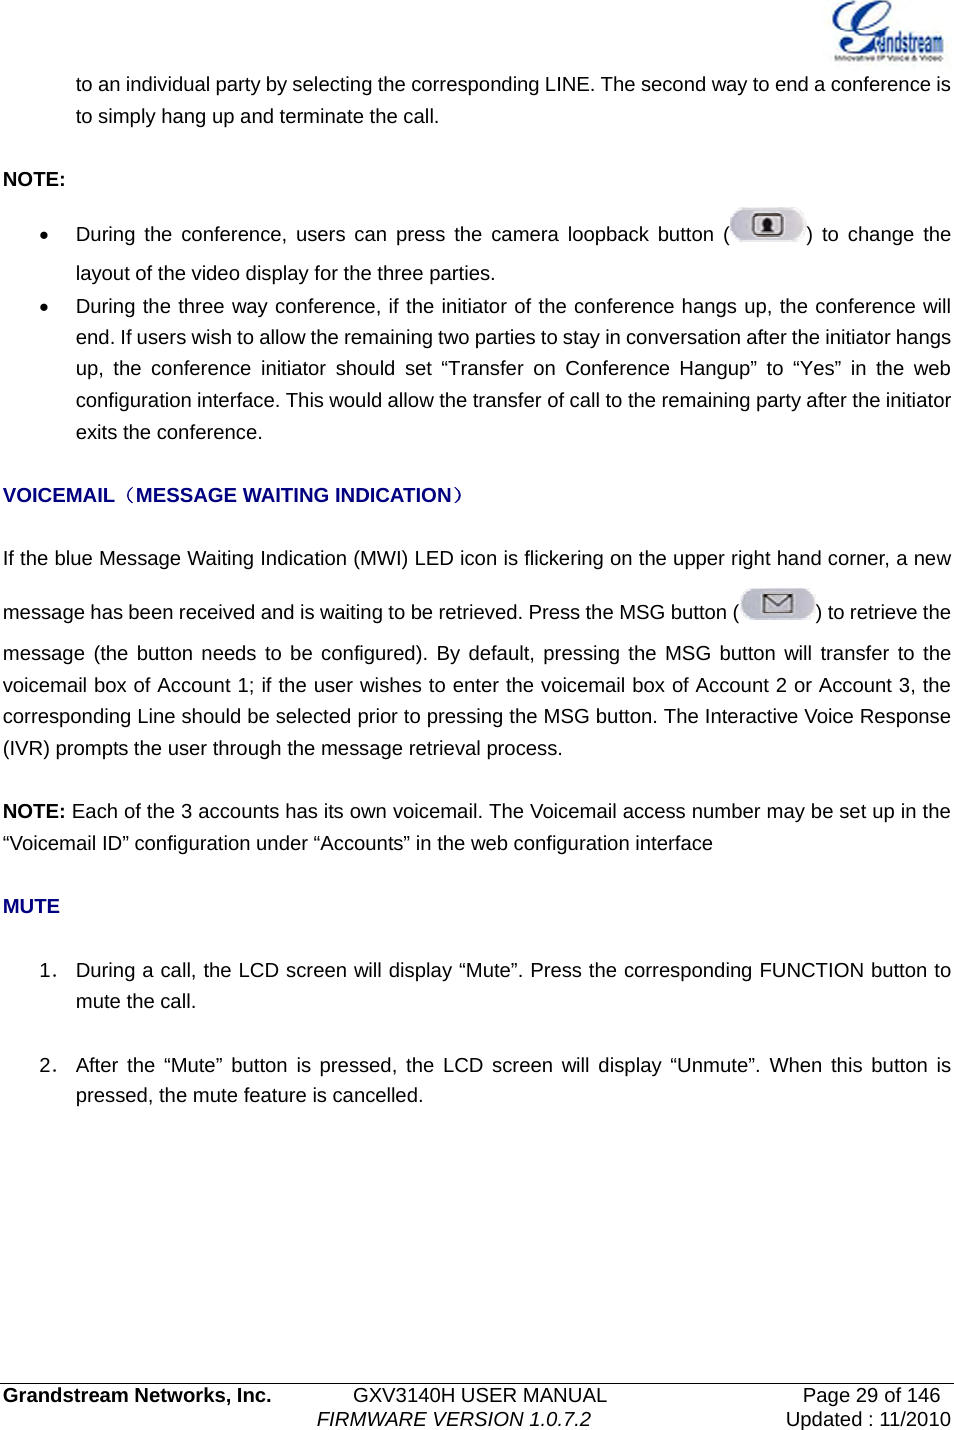   Grandstream Networks, Inc.        GXV3140H USER MANUAL                  Page 29 of 146                                FIRMWARE VERSION 1.0.7.2 Updated : 11/2010  to an individual party by selecting the corresponding LINE. The second way to end a conference is to simply hang up and terminate the call.  NOTE: •  During the conference, users can press the camera loopback button ( ) to change the layout of the video display for the three parties. •  During the three way conference, if the initiator of the conference hangs up, the conference will end. If users wish to allow the remaining two parties to stay in conversation after the initiator hangs up, the conference initiator should set “Transfer on Conference Hangup” to “Yes” in the web configuration interface. This would allow the transfer of call to the remaining party after the initiator exits the conference.    VOICEMAIL（MESSAGE WAITING INDICATION）  If the blue Message Waiting Indication (MWI) LED icon is flickering on the upper right hand corner, a new message has been received and is waiting to be retrieved. Press the MSG button ( ) to retrieve the message (the button needs to be configured). By default, pressing the MSG button will transfer to the voicemail box of Account 1; if the user wishes to enter the voicemail box of Account 2 or Account 3, the corresponding Line should be selected prior to pressing the MSG button. The Interactive Voice Response (IVR) prompts the user through the message retrieval process.  NOTE: Each of the 3 accounts has its own voicemail. The Voicemail access number may be set up in the “Voicemail ID” configuration under “Accounts” in the web configuration interface  MUTE  1． During a call, the LCD screen will display “Mute”. Press the corresponding FUNCTION button to mute the call.  2． After the “Mute” button is pressed, the LCD screen will display “Unmute”. When this button is pressed, the mute feature is cancelled. 